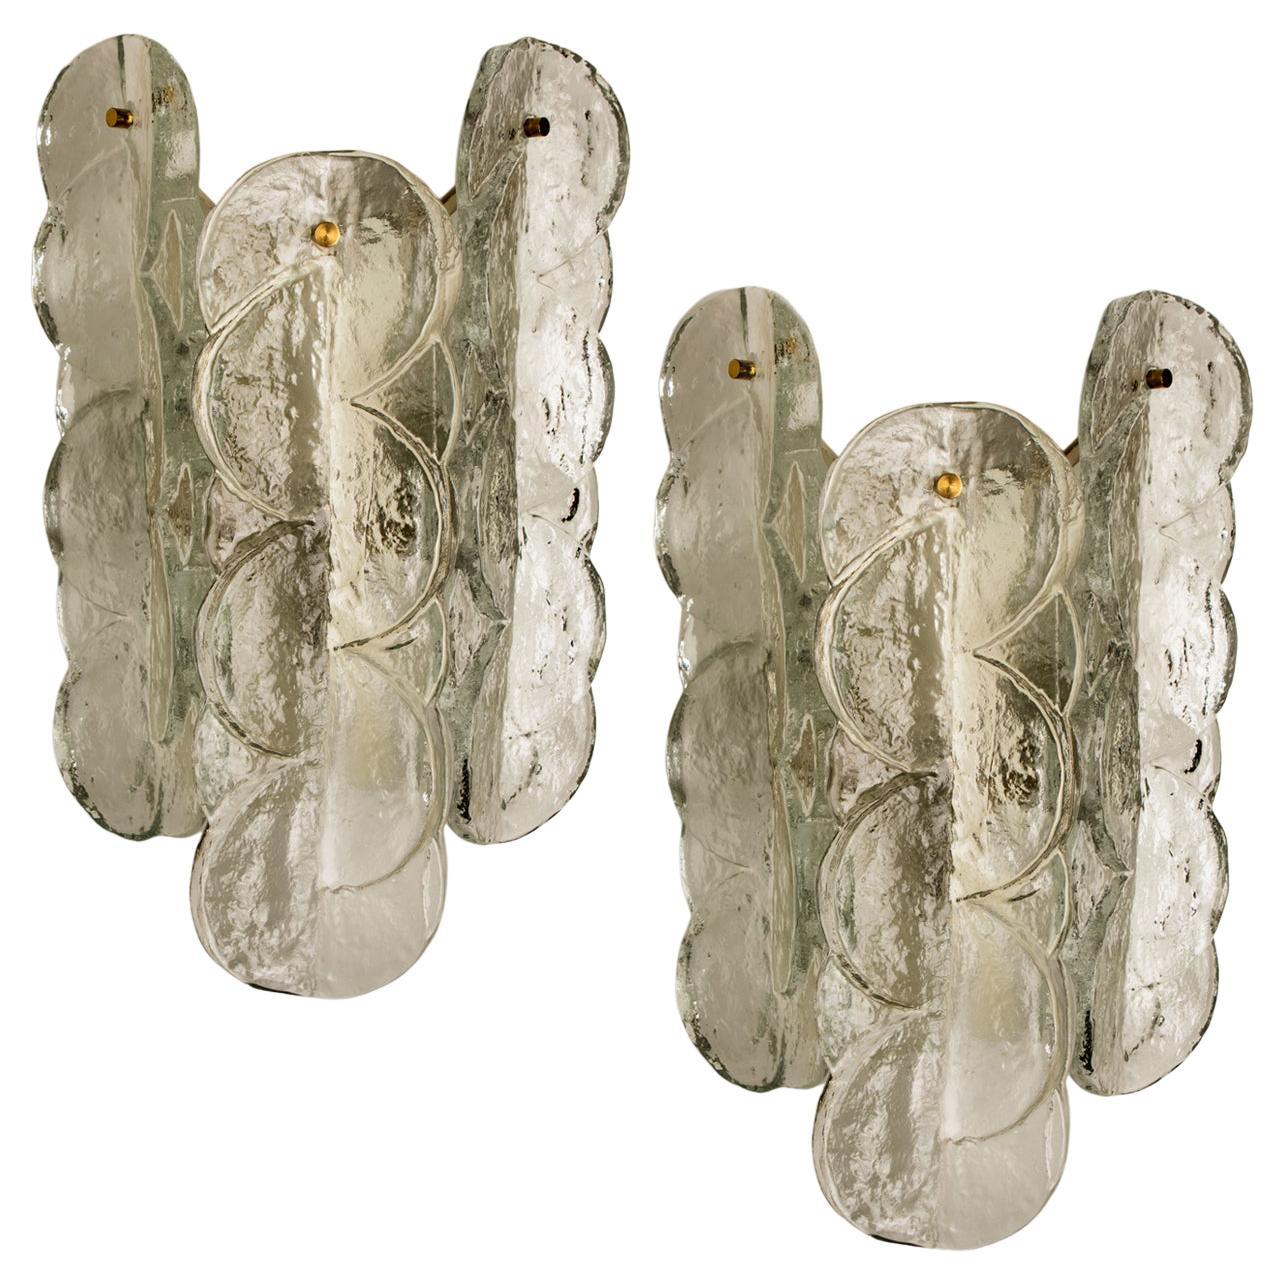 Pair of Kalmar swirl sconces wall lights with clear colored swirl glass. Beautiful, thick textured glass is complimented by brass and metal white metal hardware. Simple and clean design. Hand blown melting glass, made of clear glass. High quality